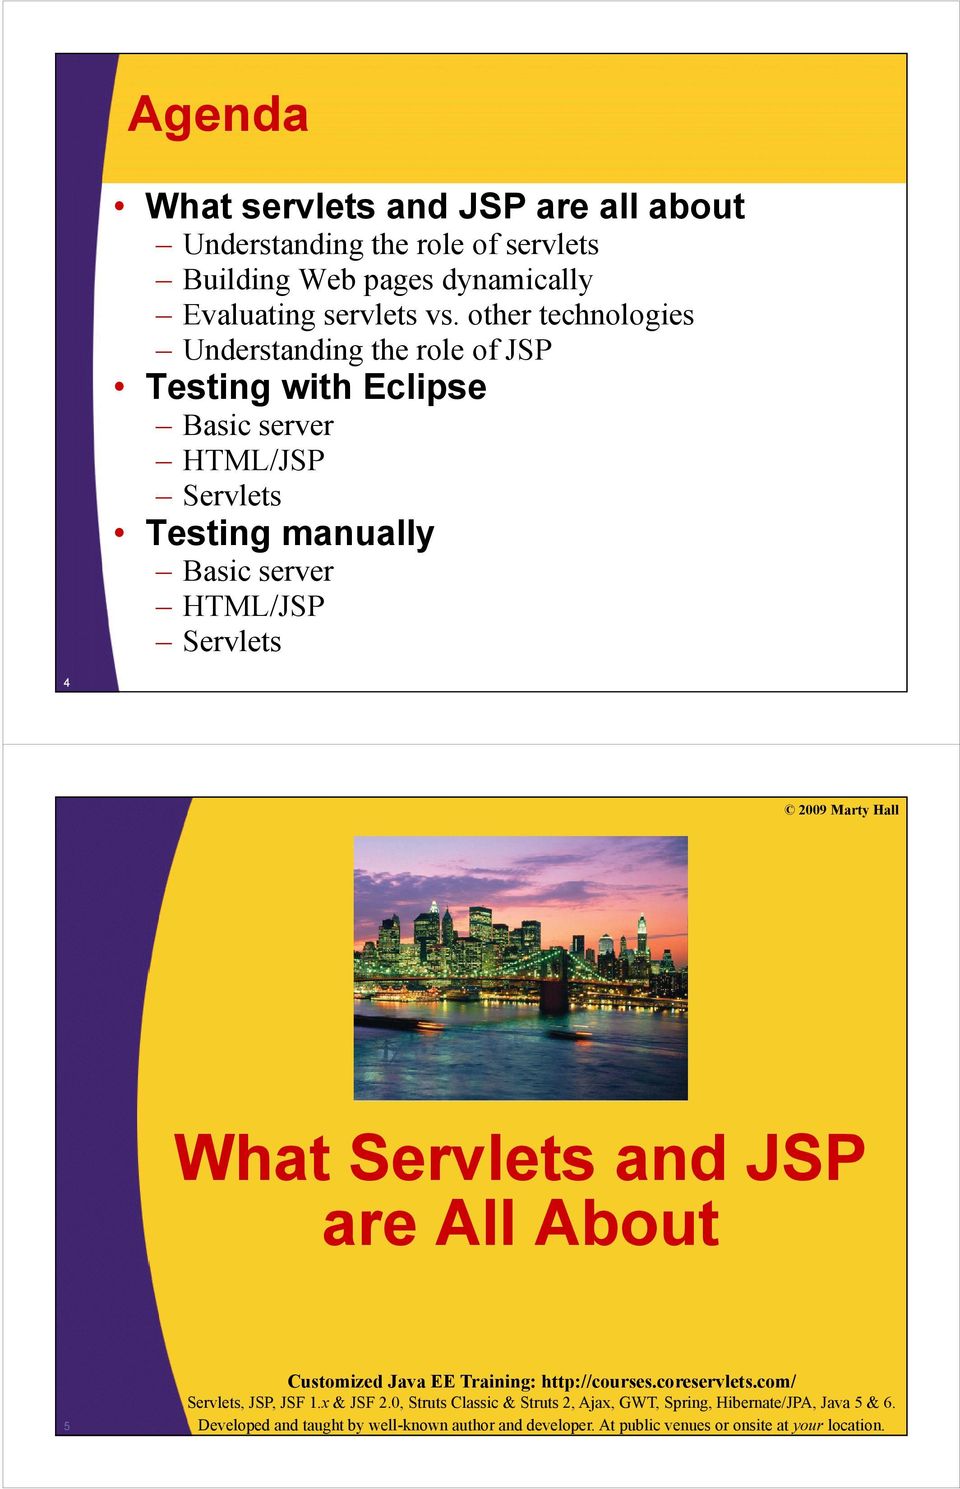 2009 Marty Hall What Servlets and JSP are All About 5 Customized Java EE Training: http://courses.coreservlets.com/ Servlets, JSP, JSF 1.x & JSF 2.